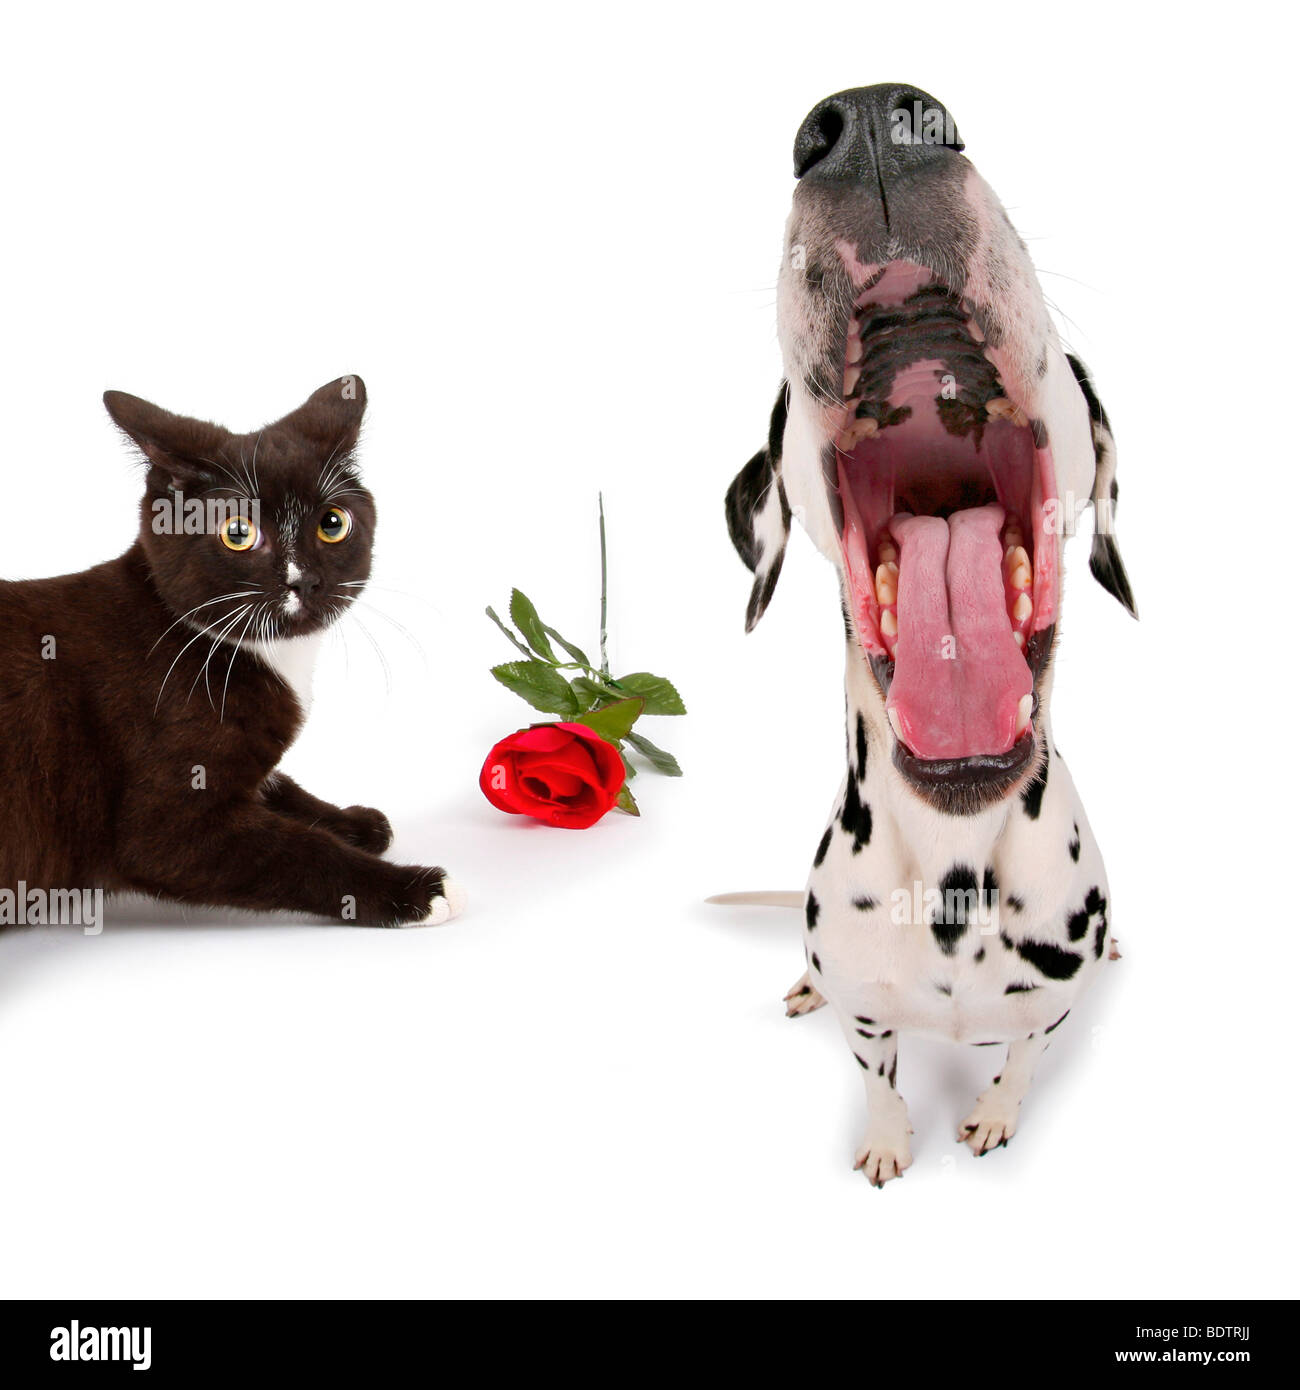 Dalmatian (Canis lupus f. familiaris), blind date, dog and cat with red rose meetng the first time Stock Photo